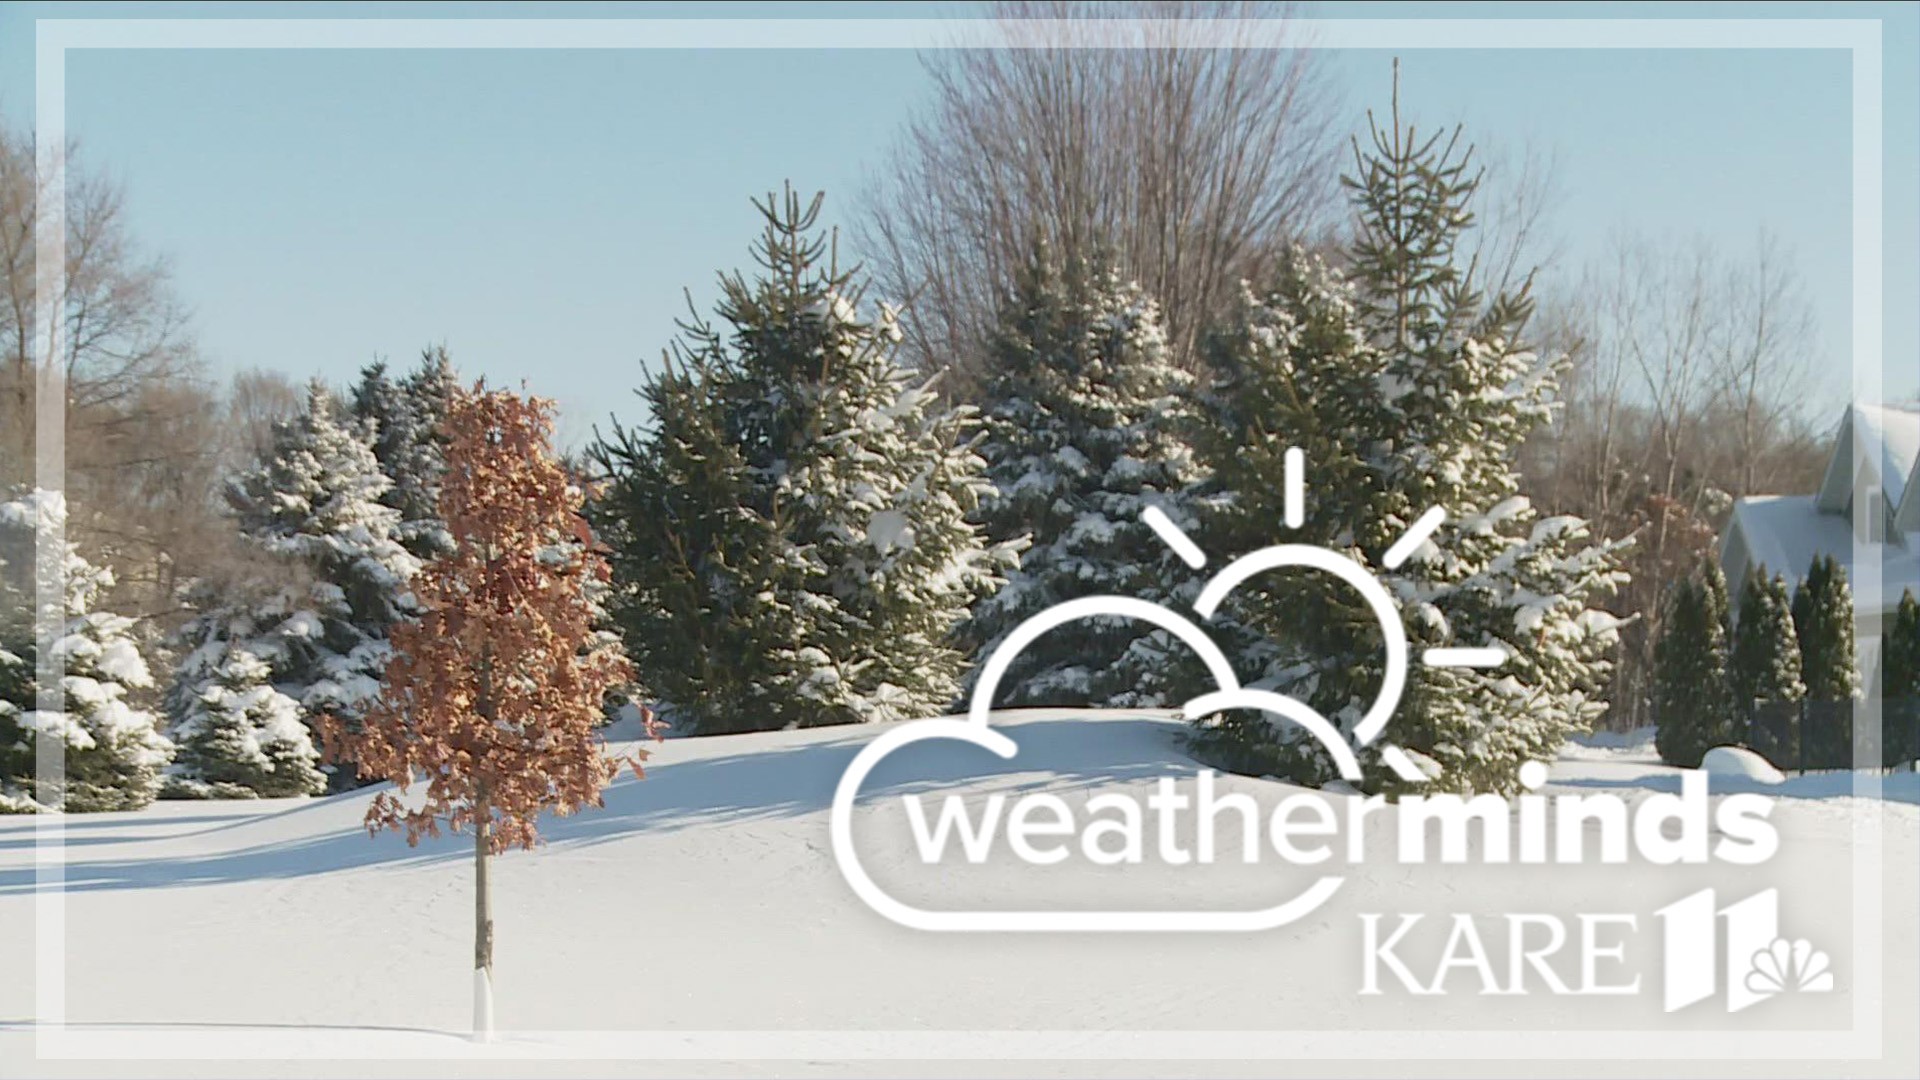 KARE 11 meteorologist Ben Dery says a new blanket of snow reflects the sun's rays much more effectively than older snow.